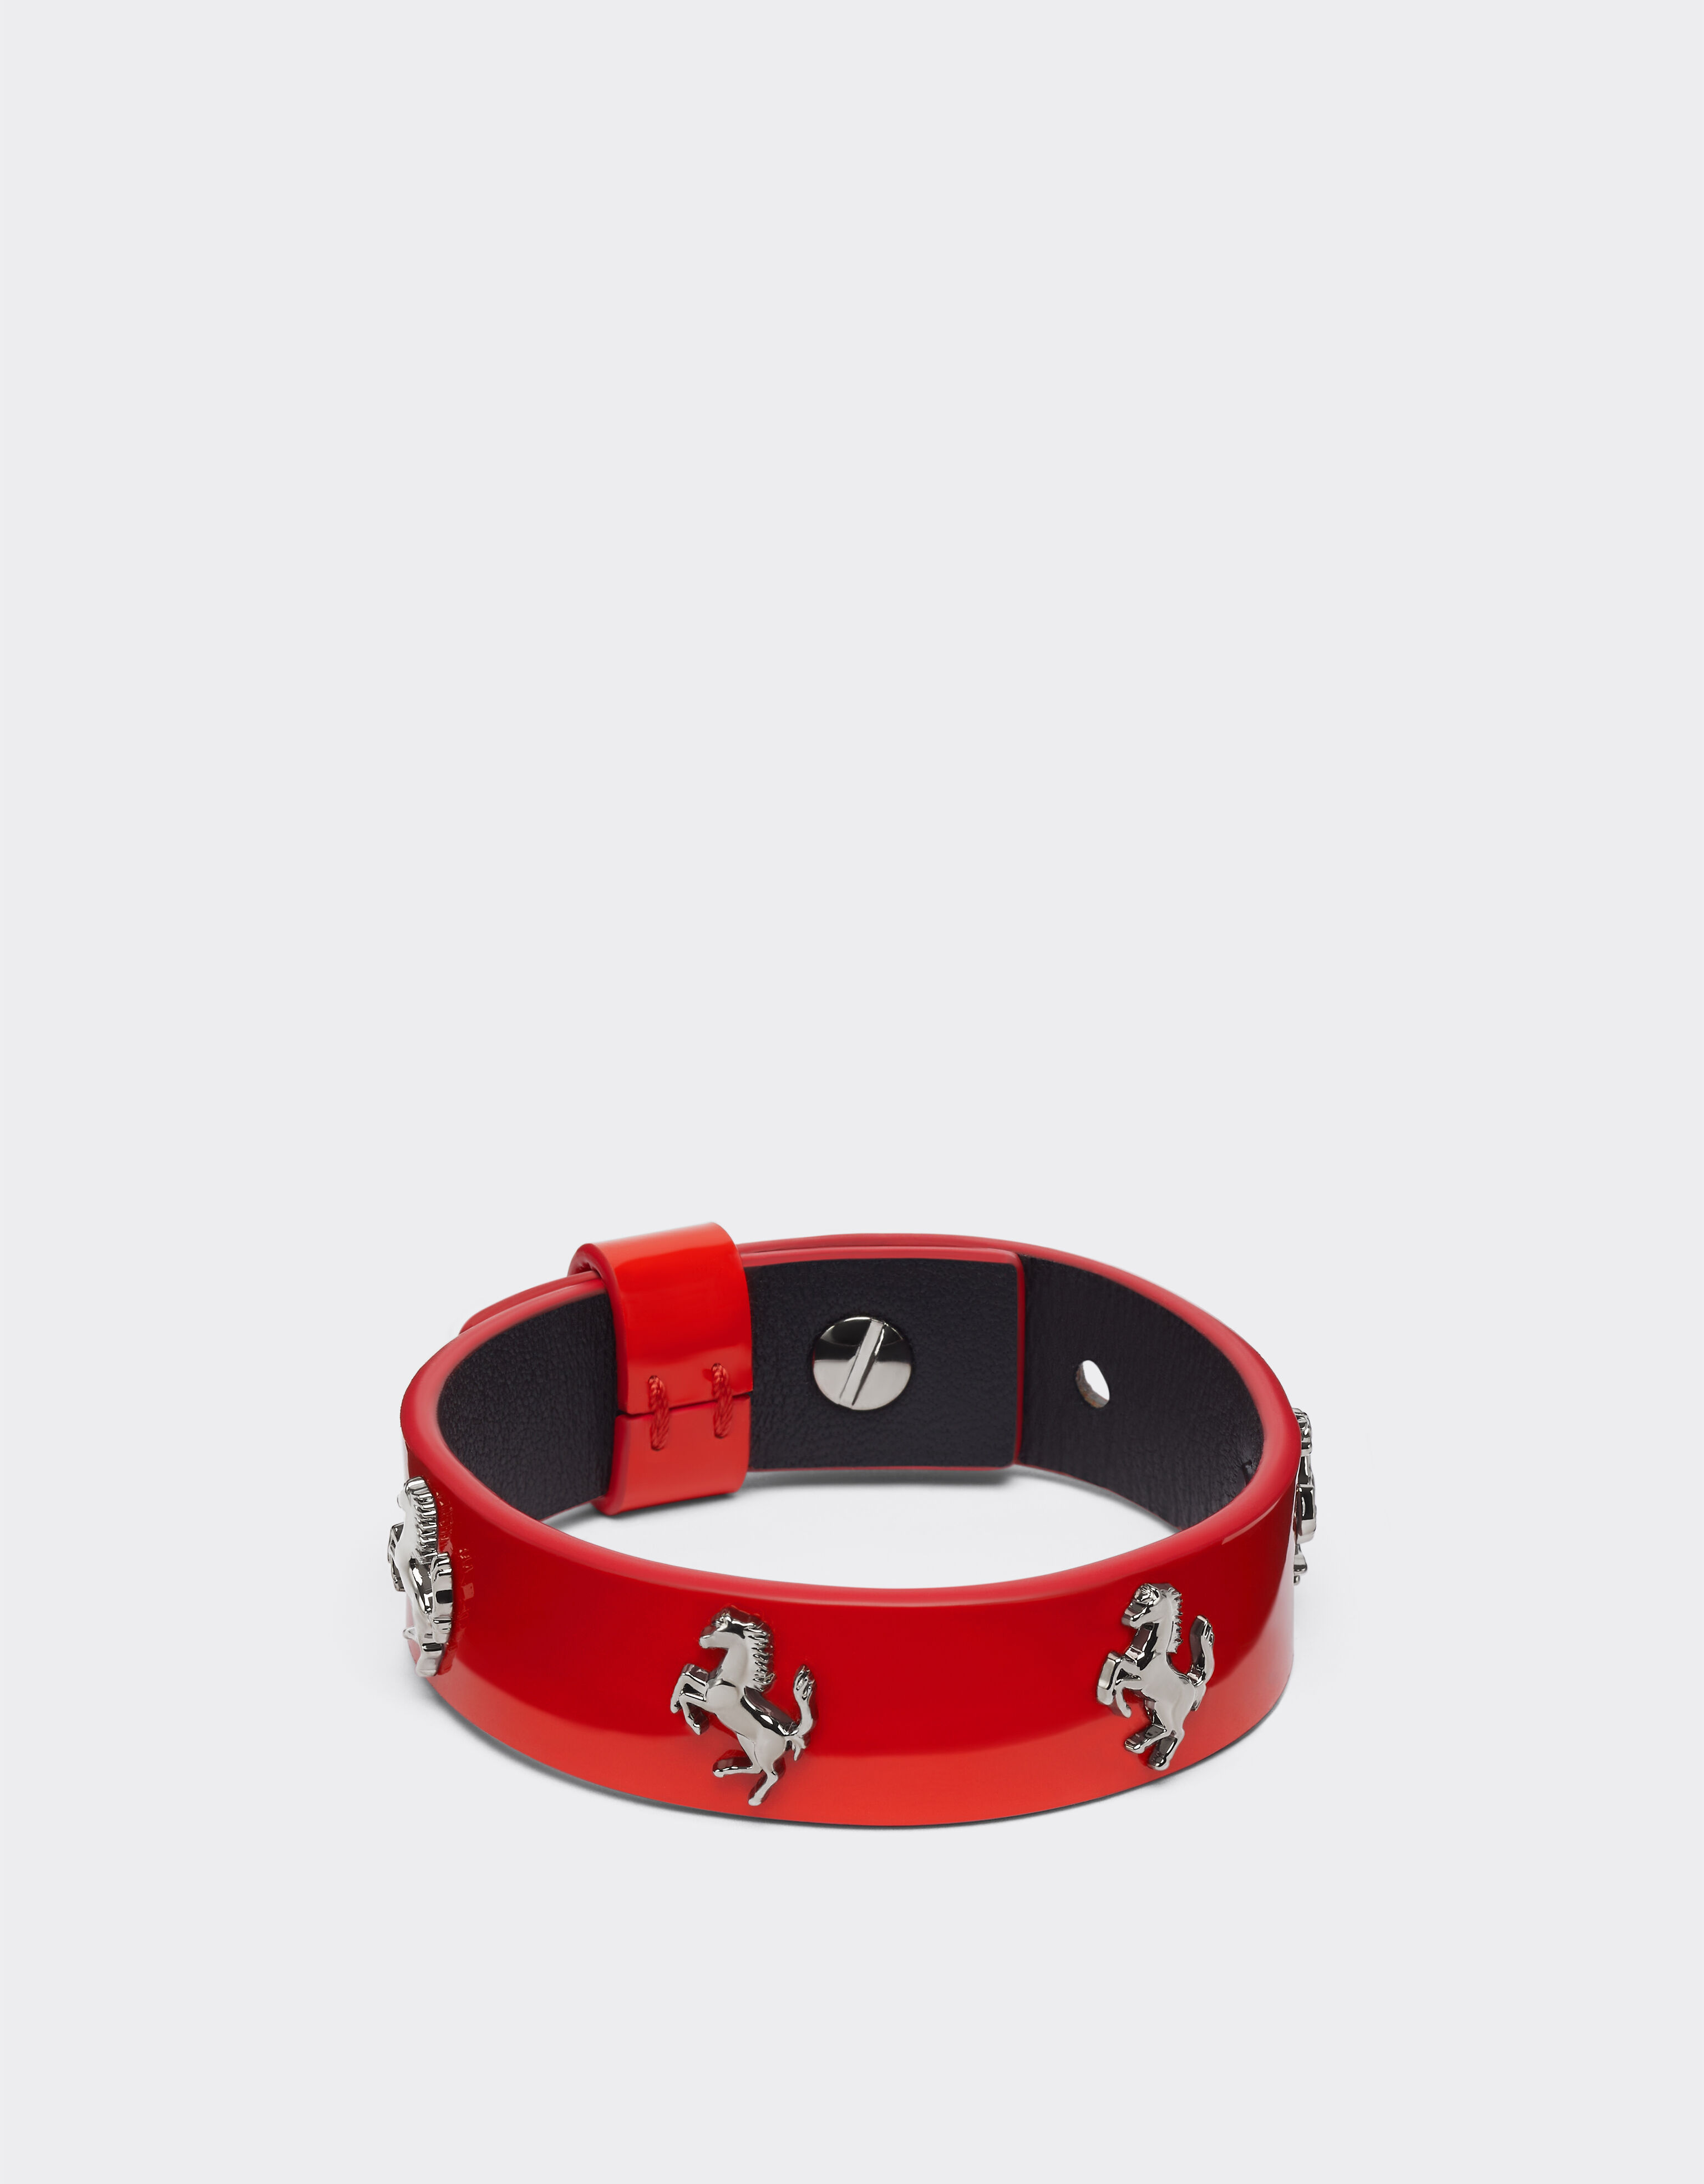 Ferrari Bracelet in red patent leather with studs Rosso Dino 20599f